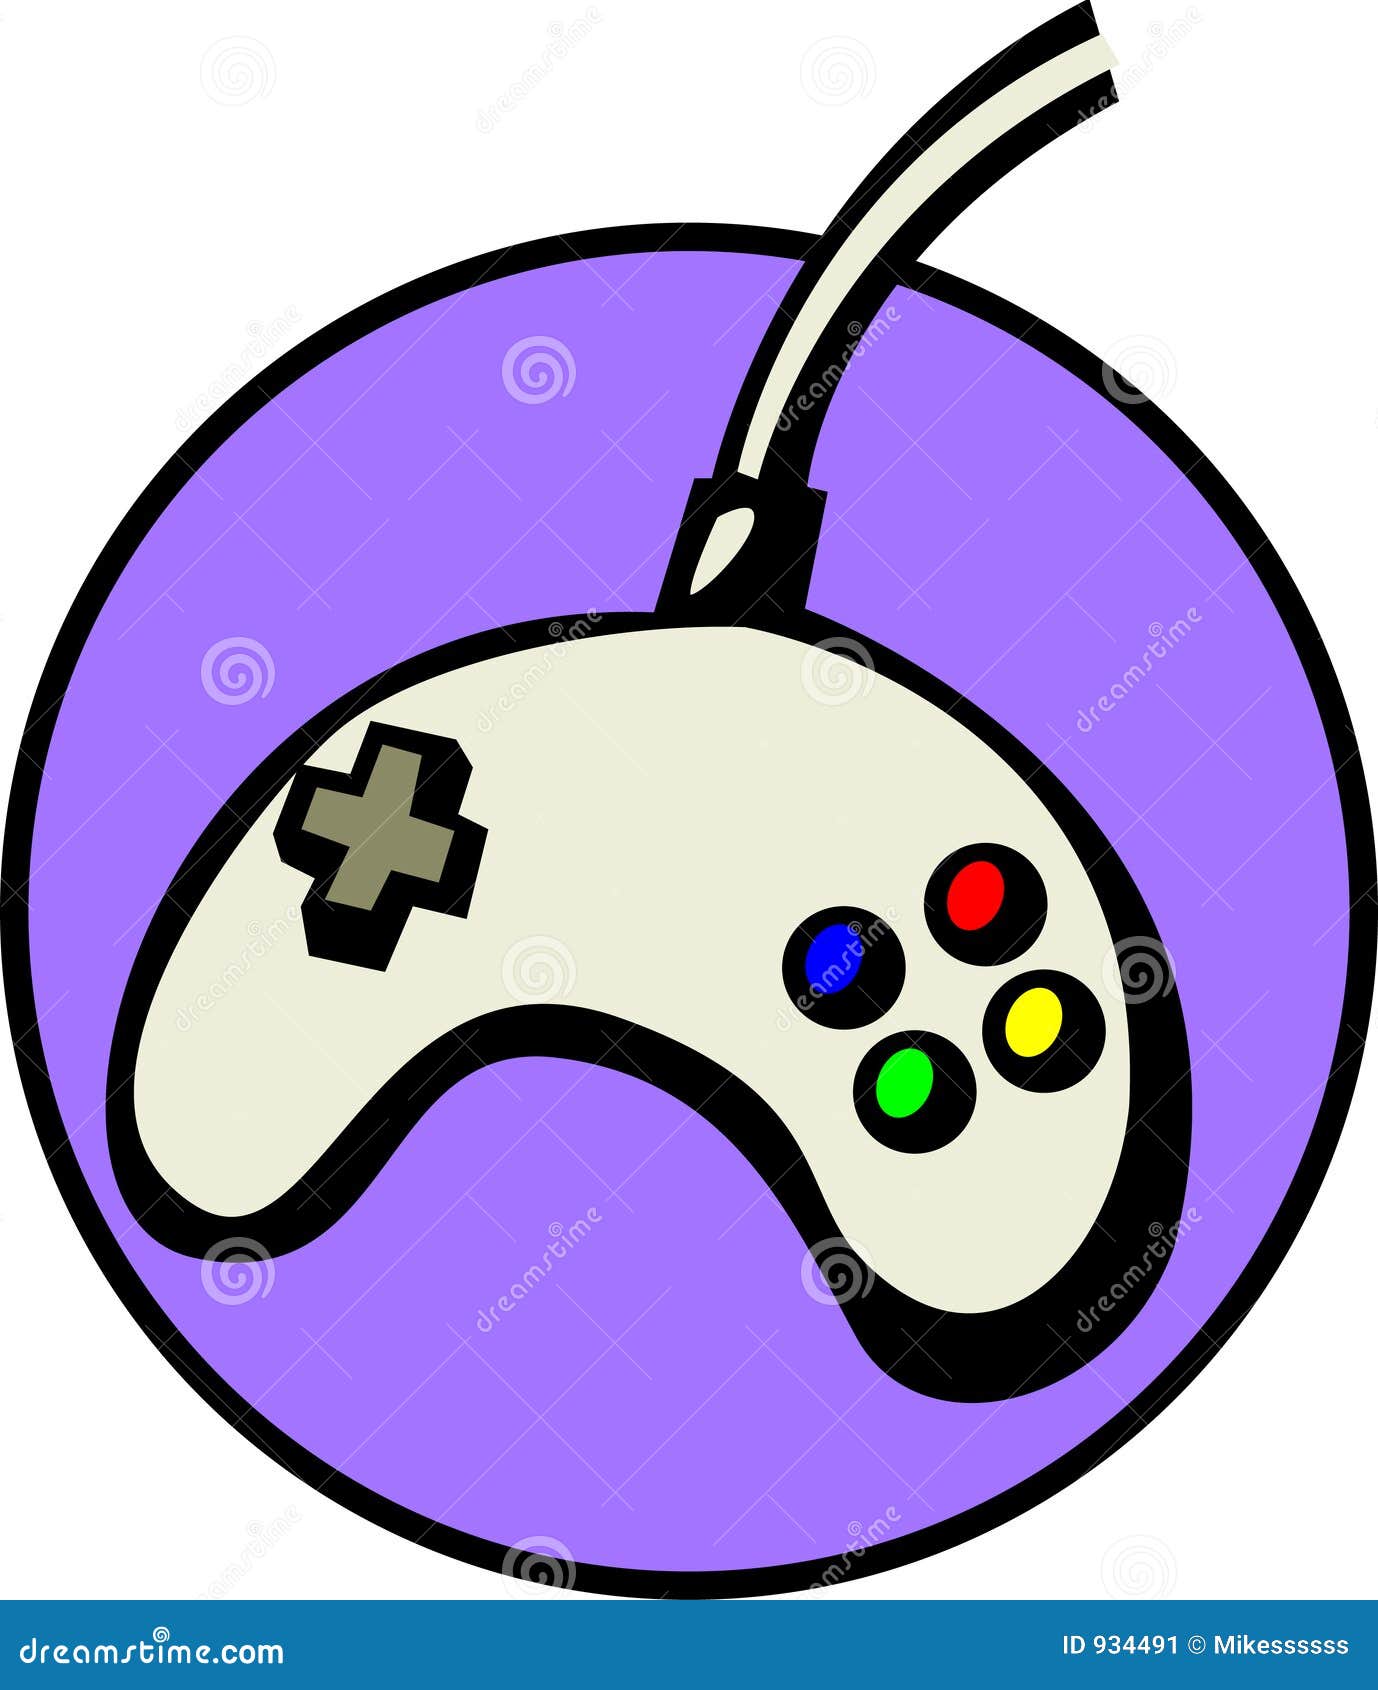 clipart video game controller - photo #39